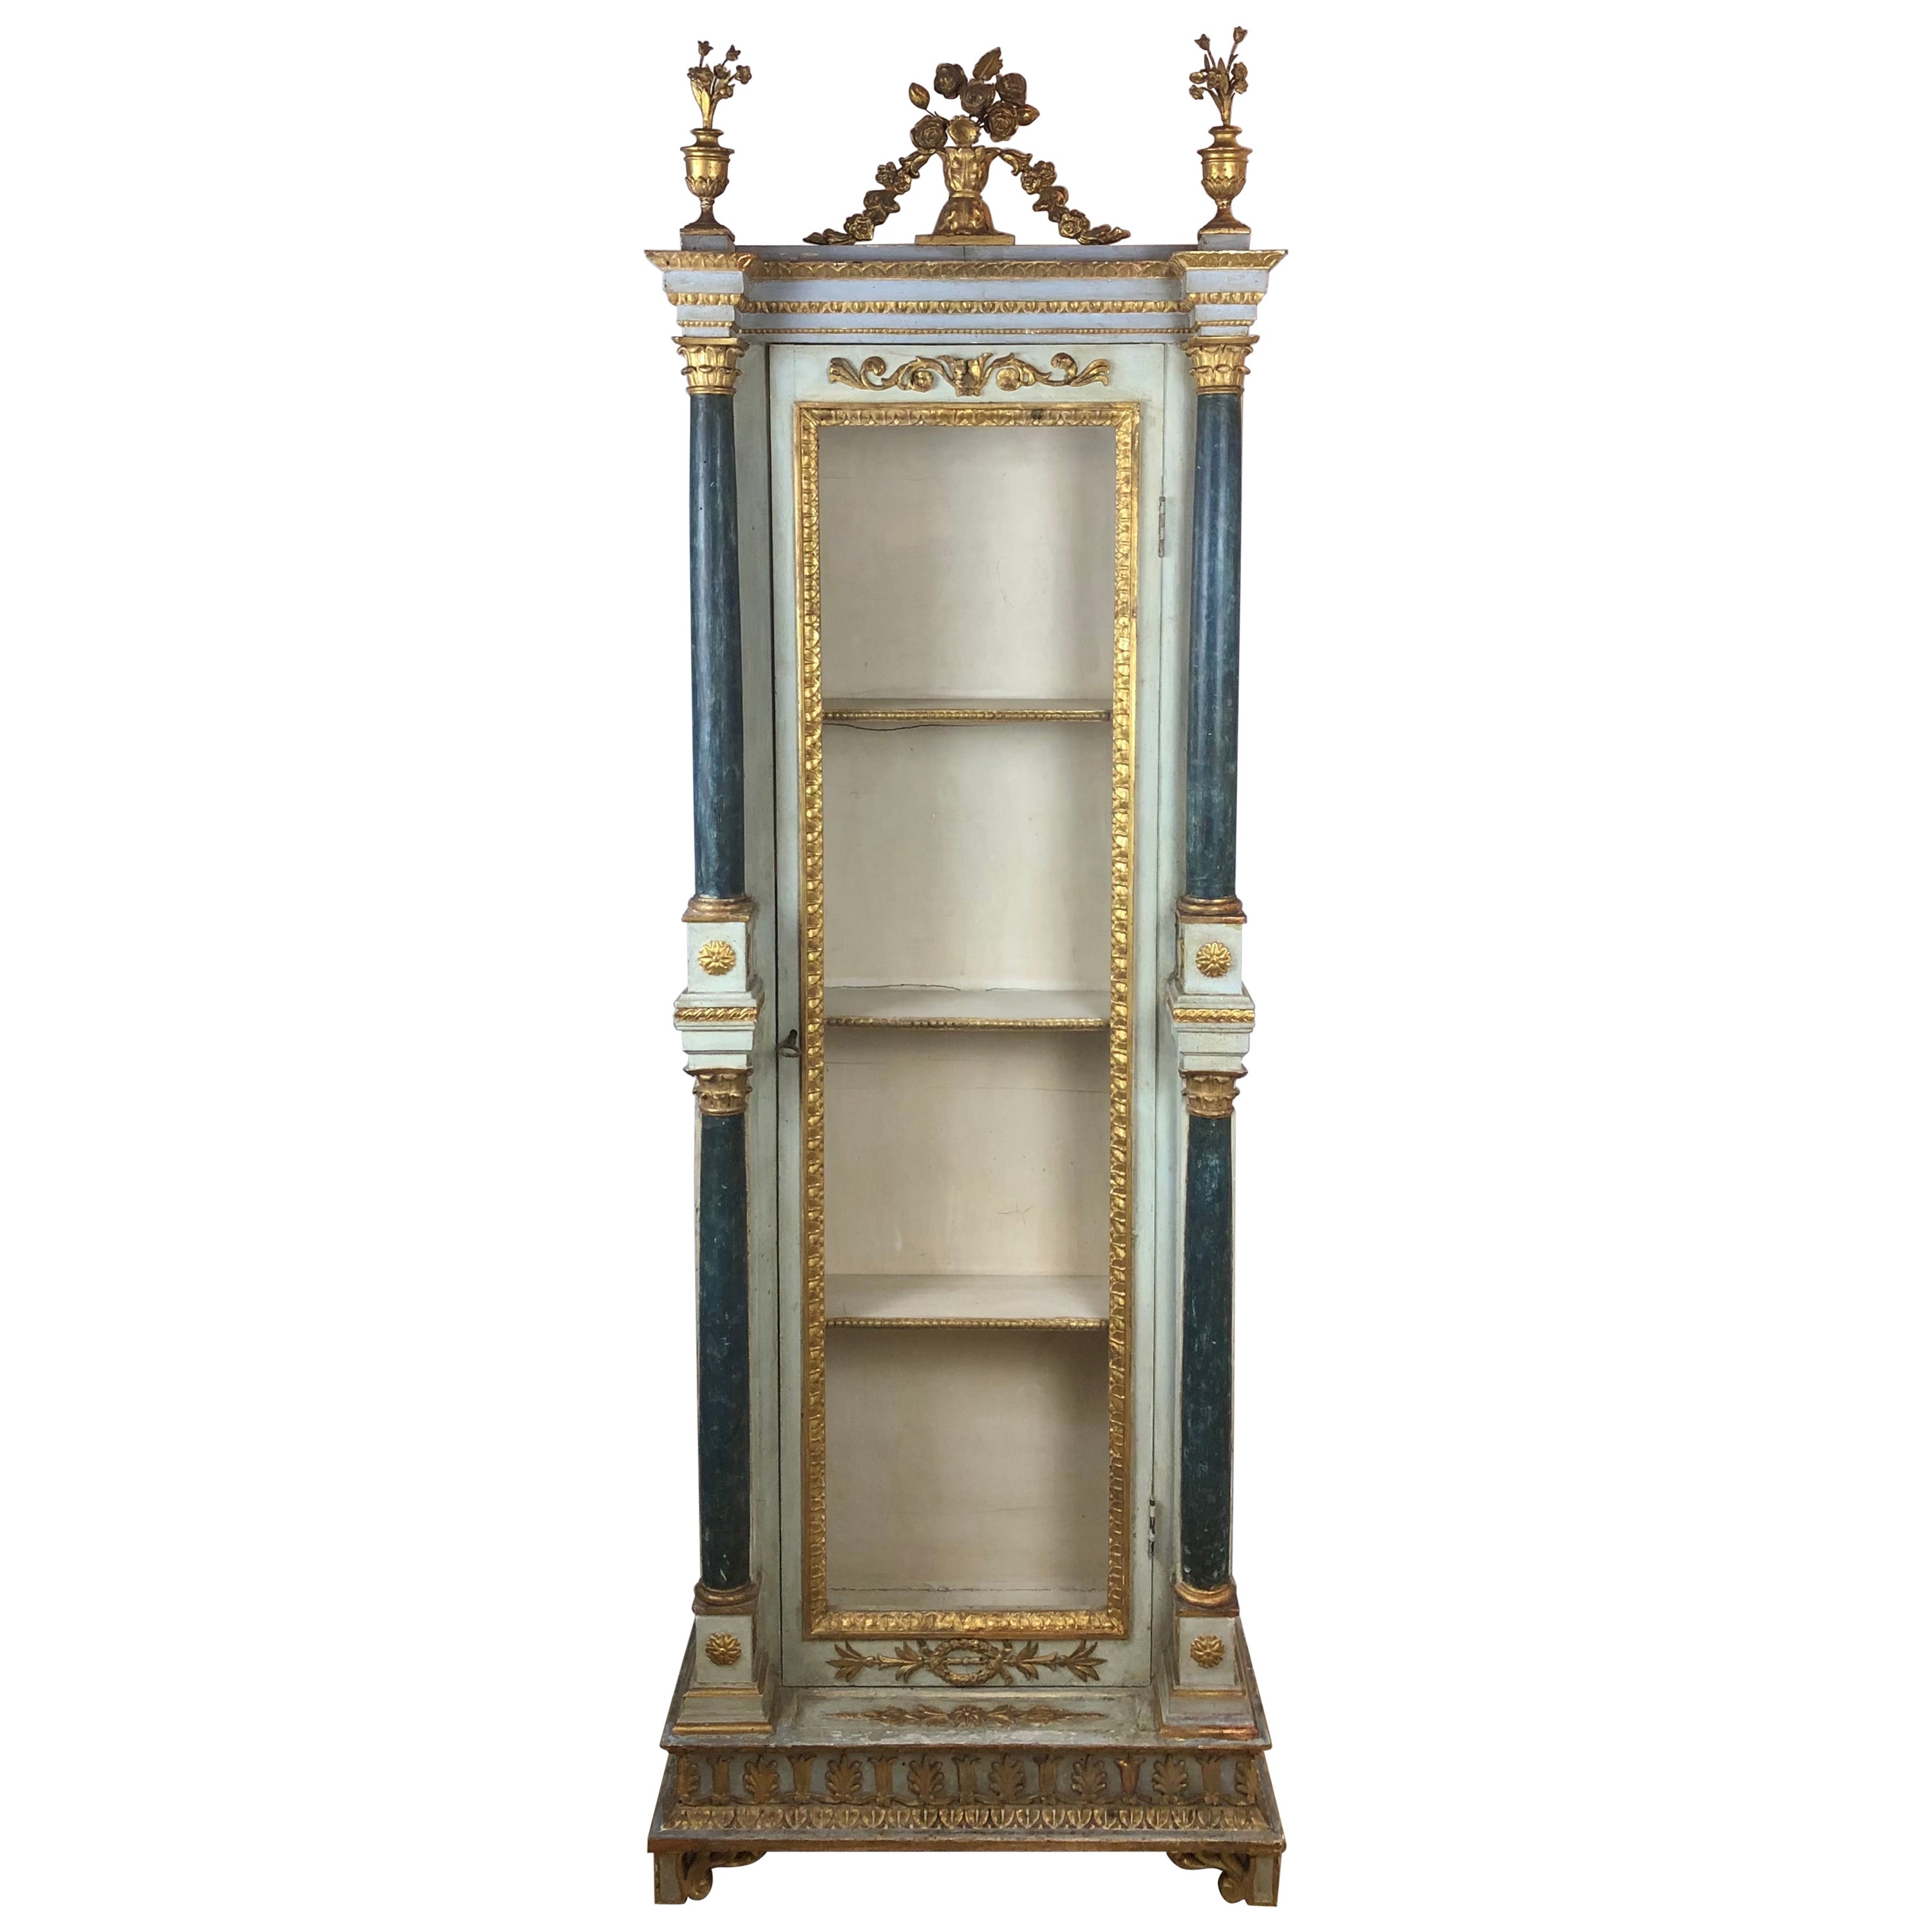 Late 18th-Early 19th Century Carved Painted and Gilt Wood Venetian Cabinet